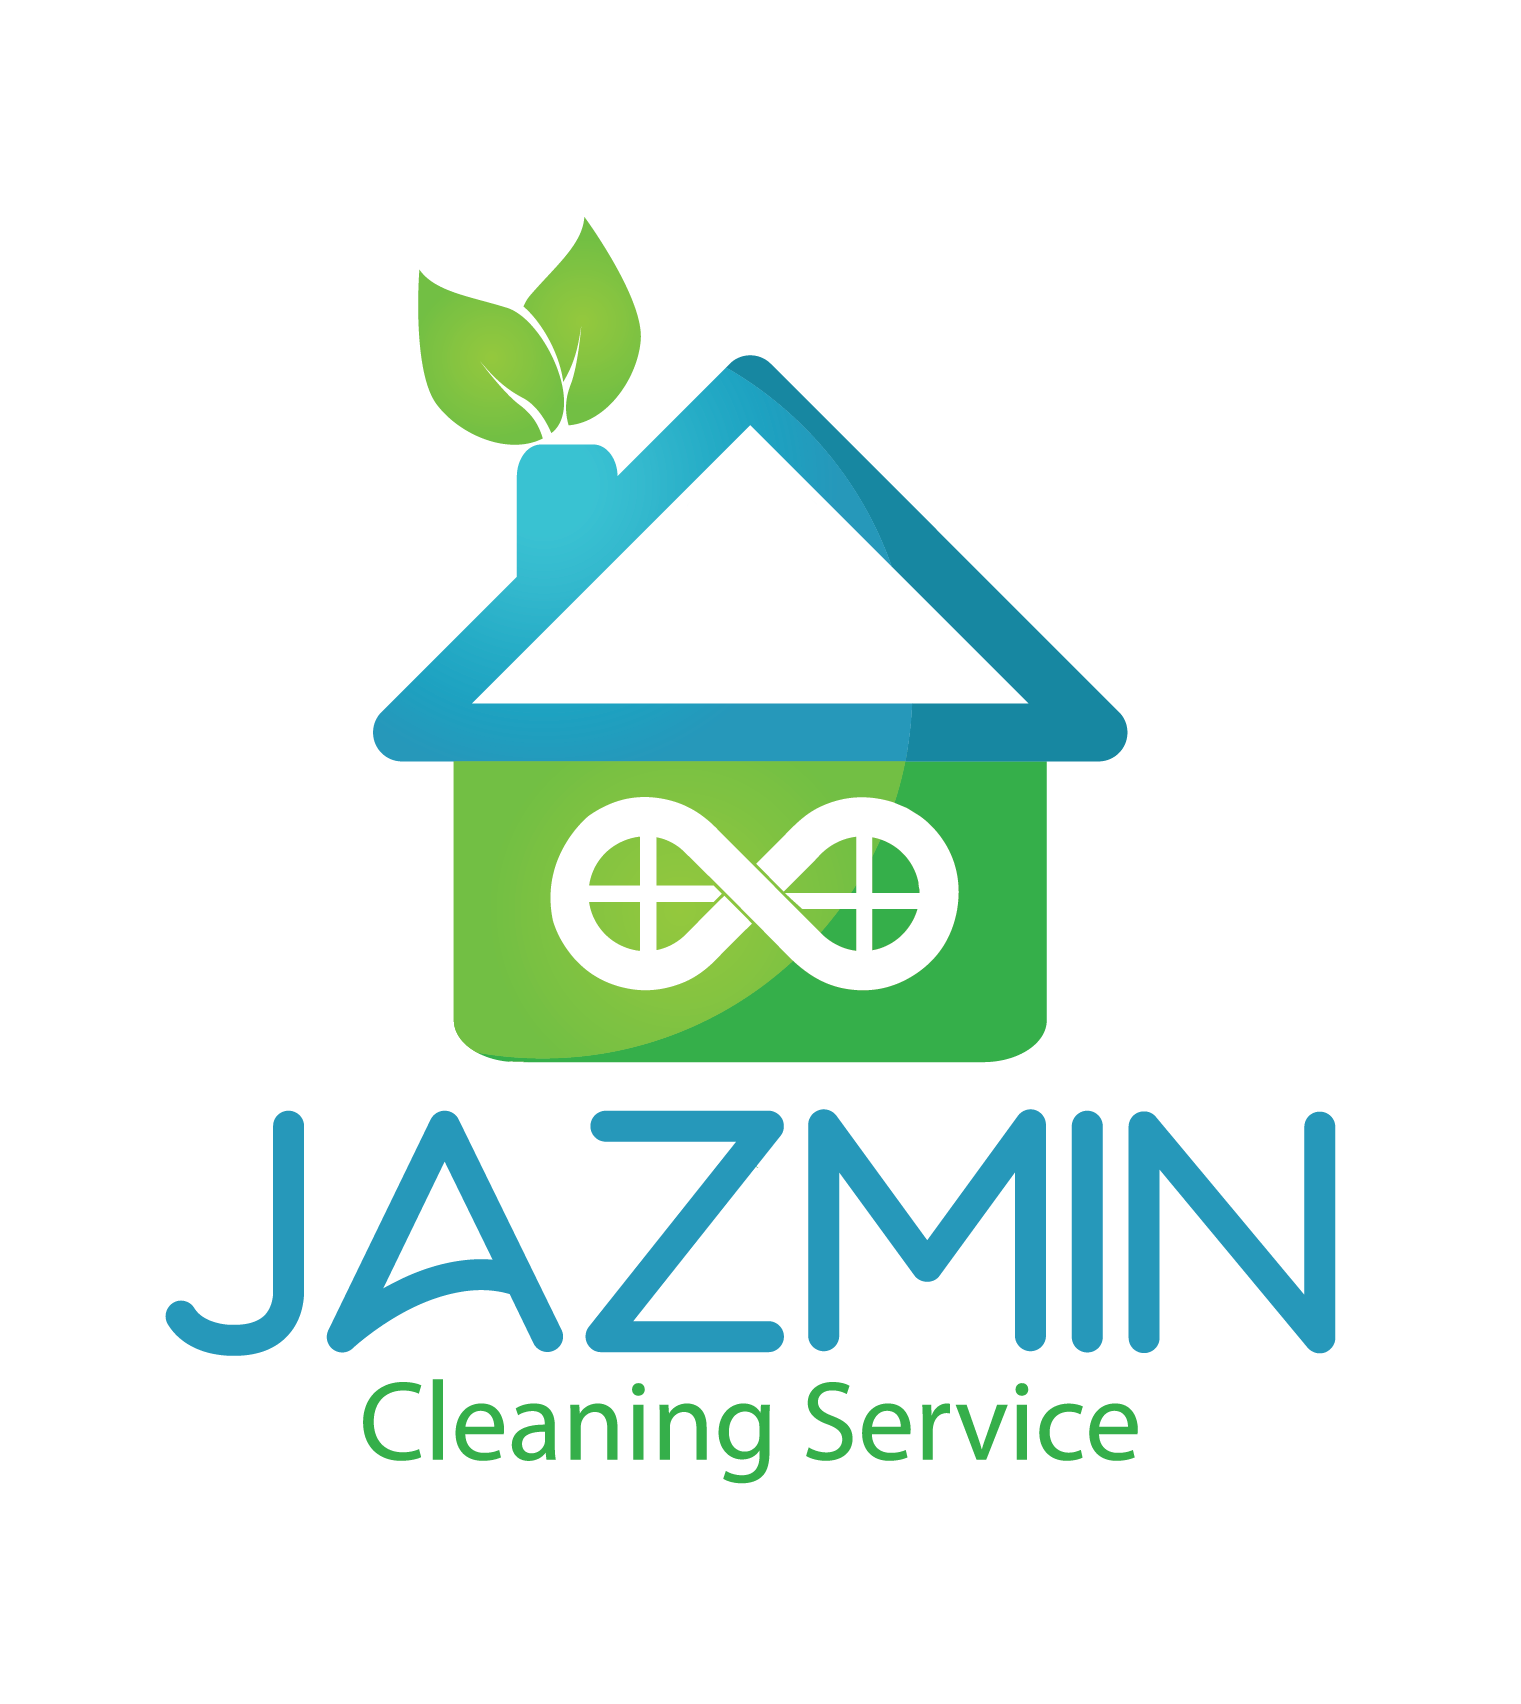 Logo of Jazmin Cleaning Service